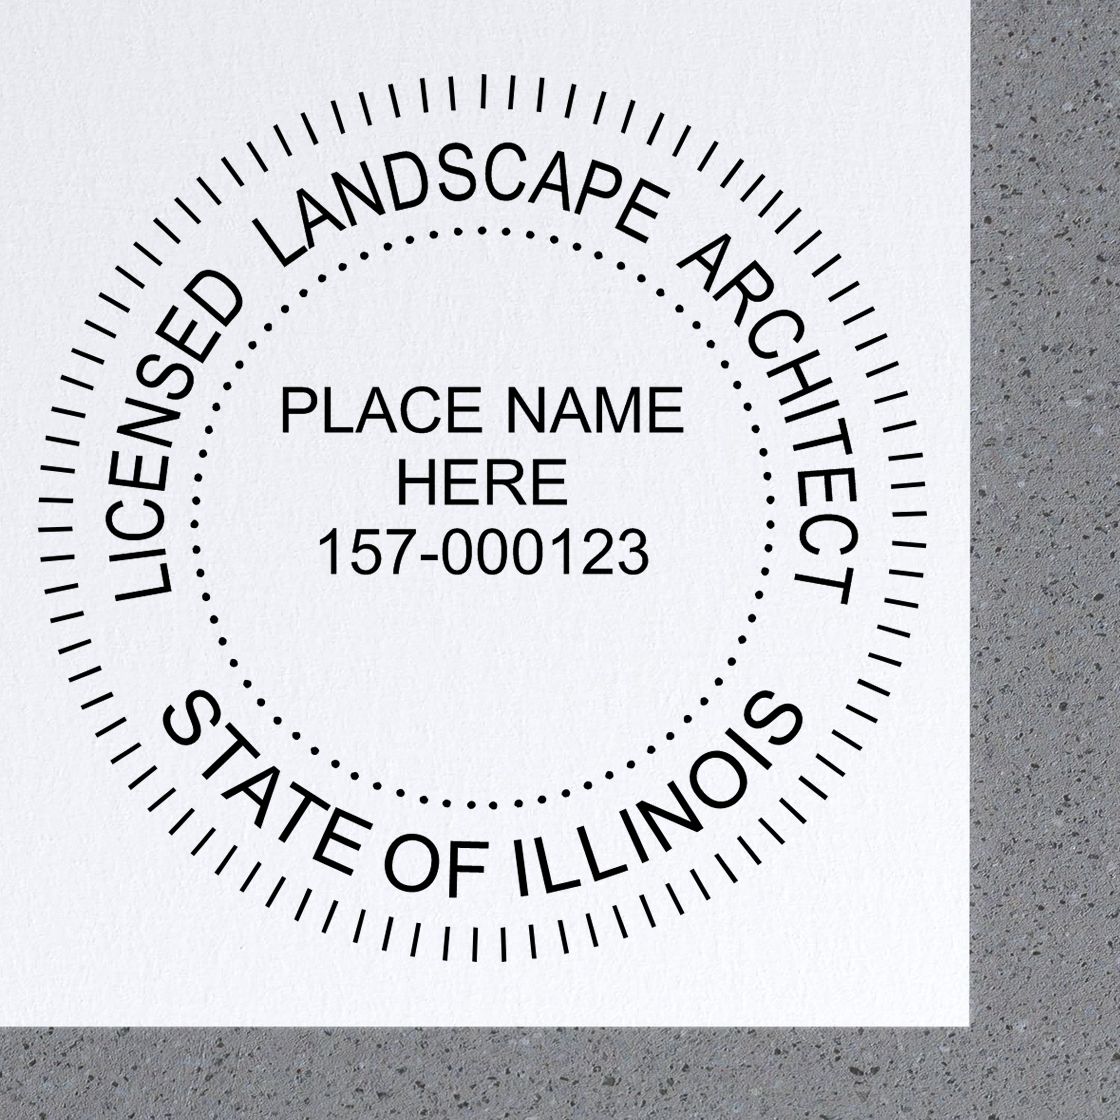 A stamped impression of the Digital Illinois Landscape Architect Stamp in this stylish lifestyle photo, setting the tone for a unique and personalized product.